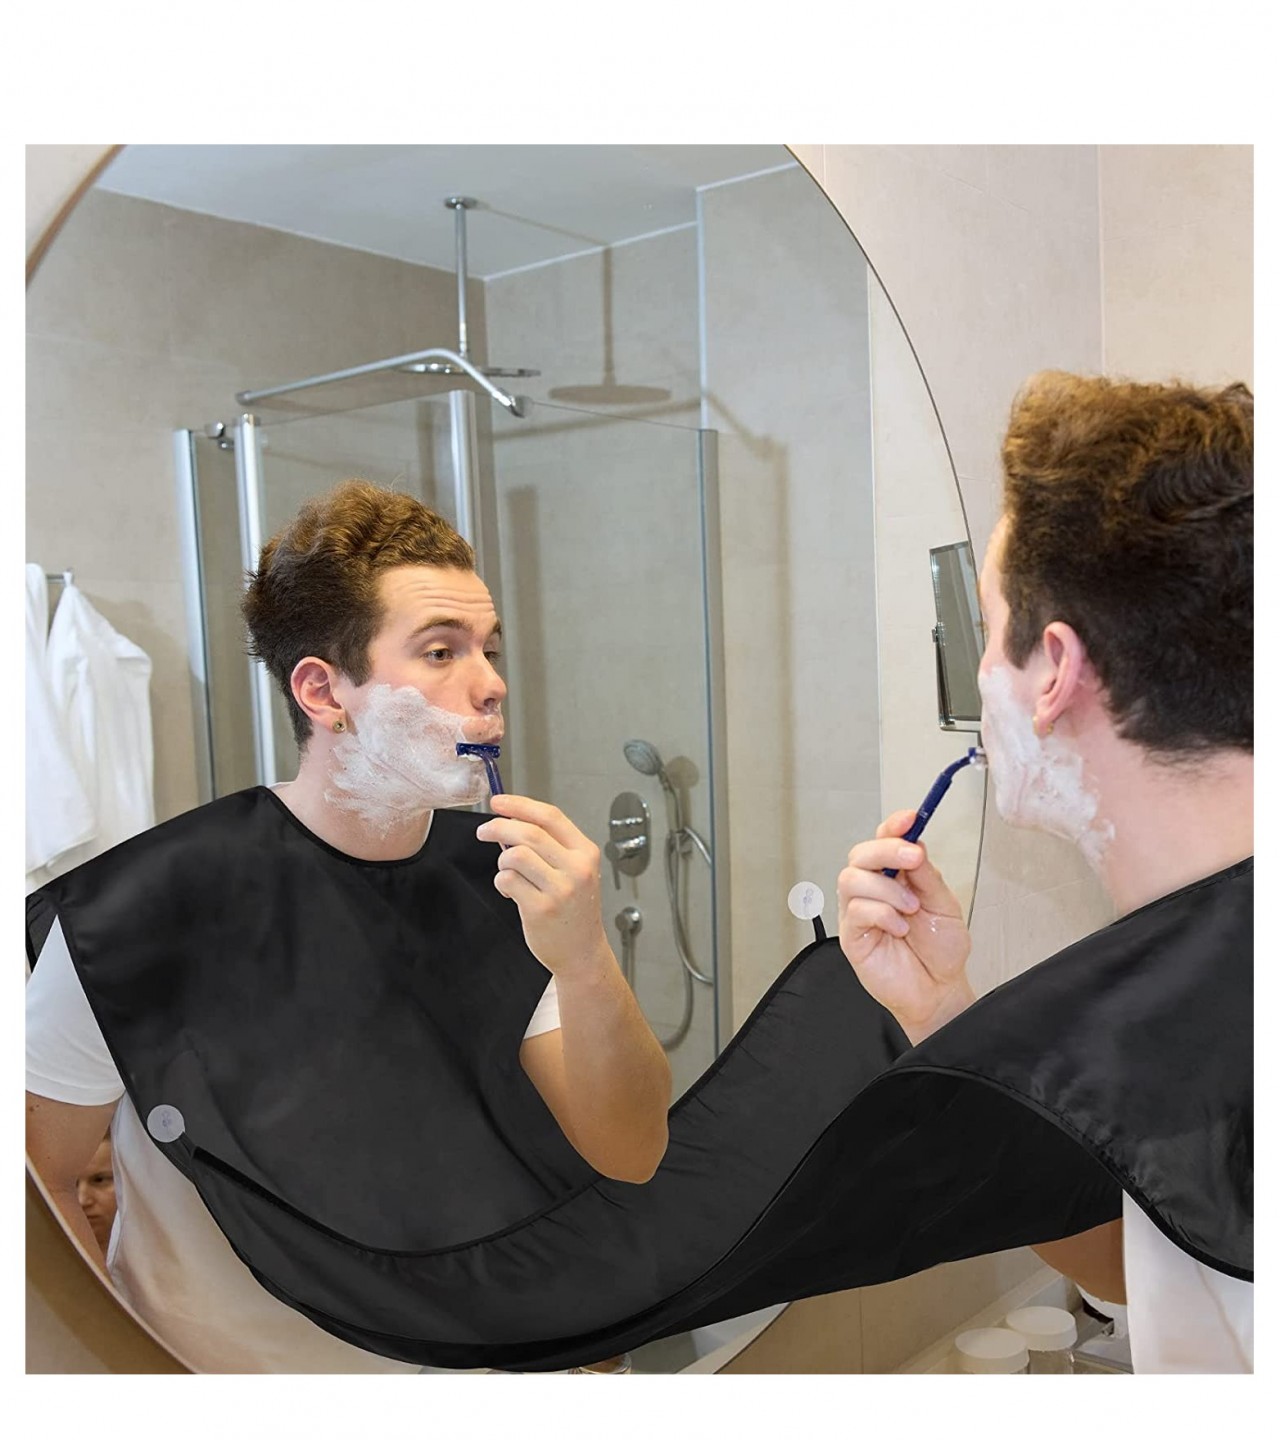 Beard Bib Cape for Shaving Apron & Hair Clippings Catcher with Suction Cup Mirror Salon